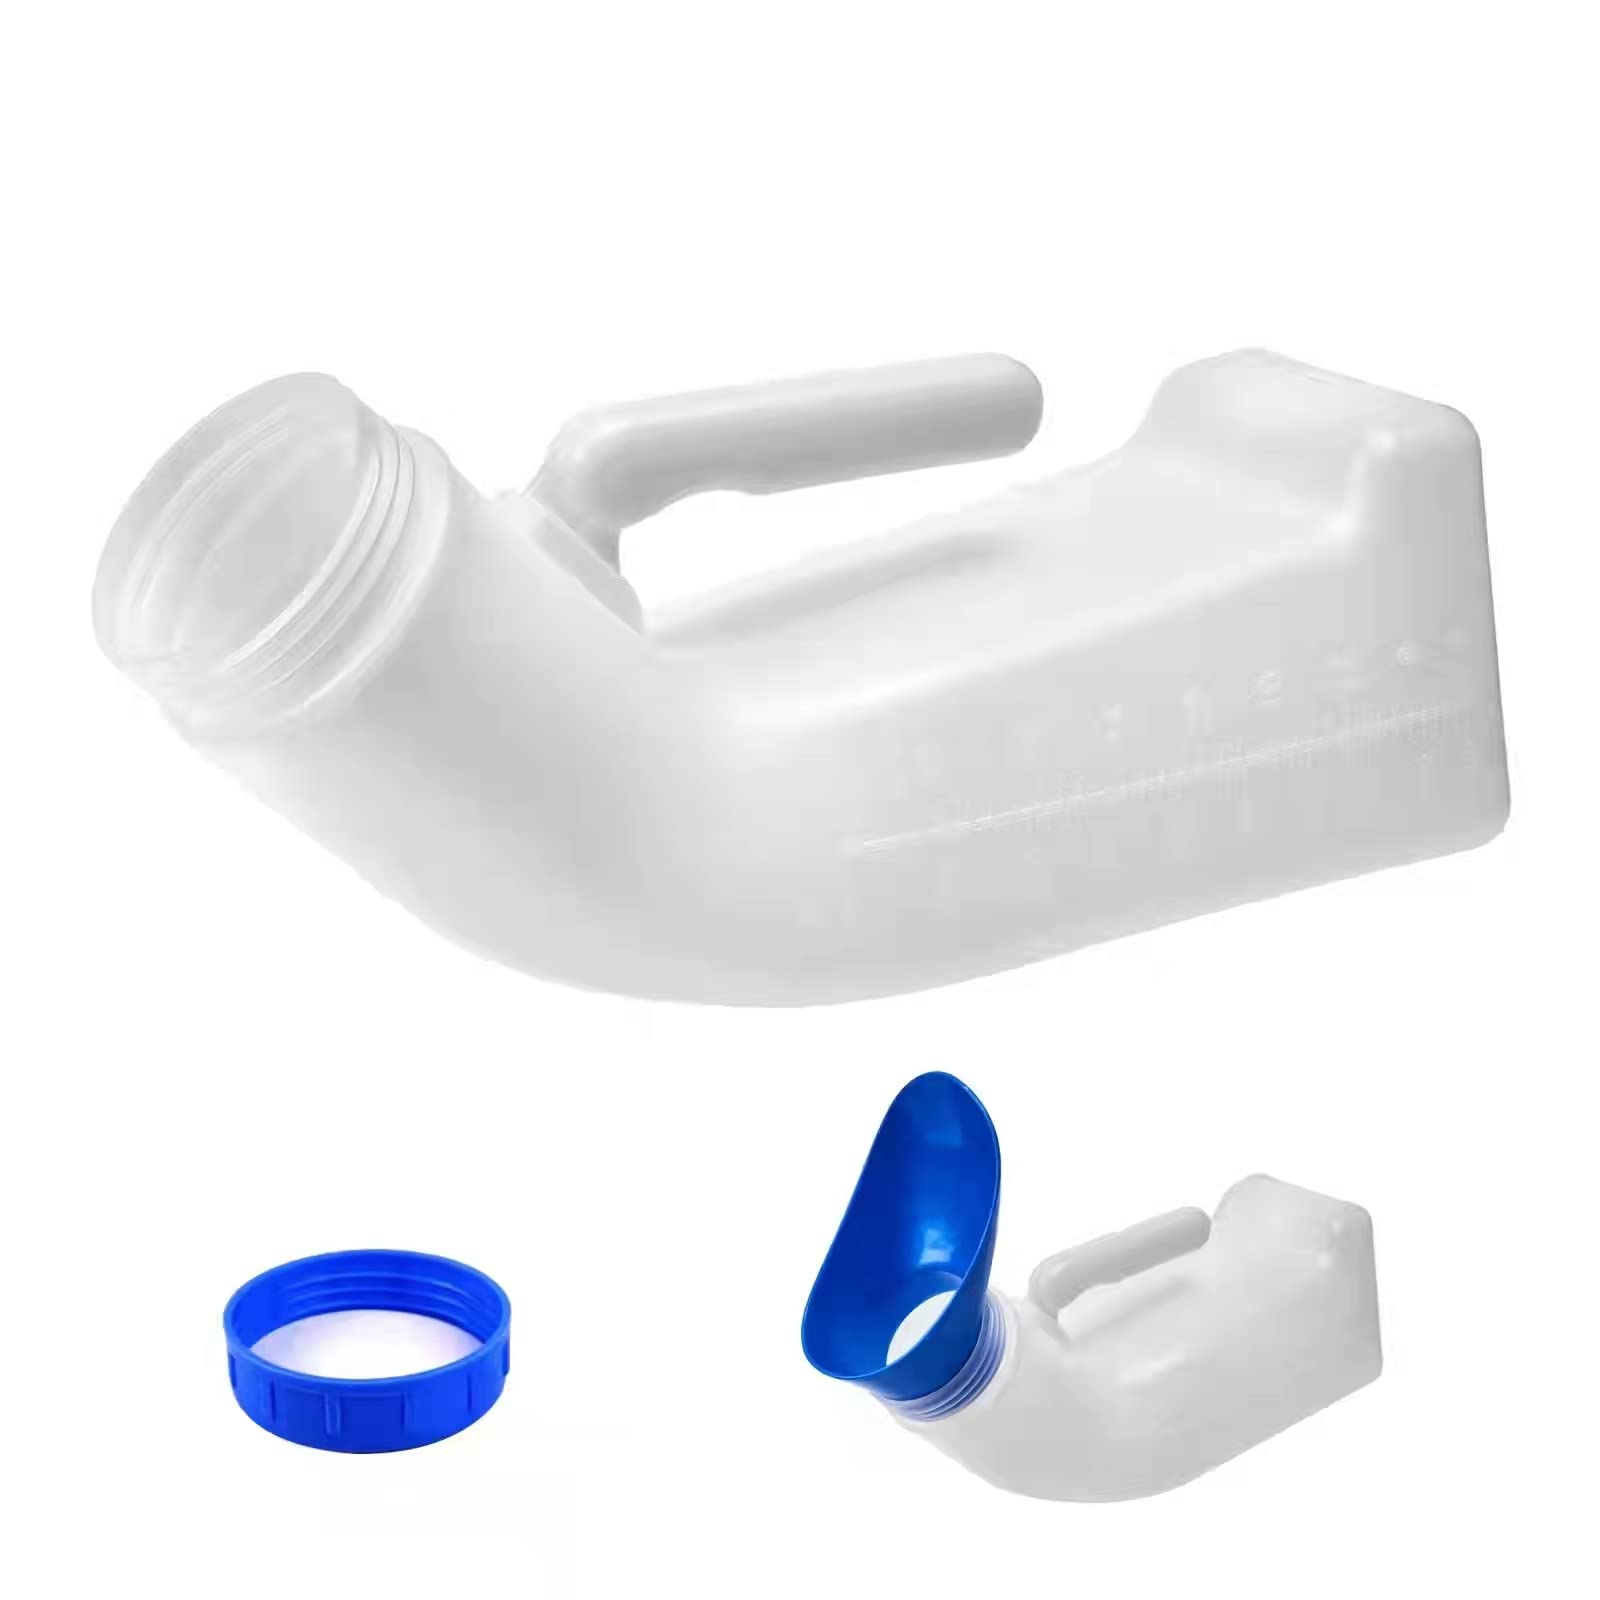 Hguim 2 Packs urinals, Portable Urinal Bedpan with Screw Cap and Funnel, Unisex Urinal, Suitable for Outdoor Travel, car